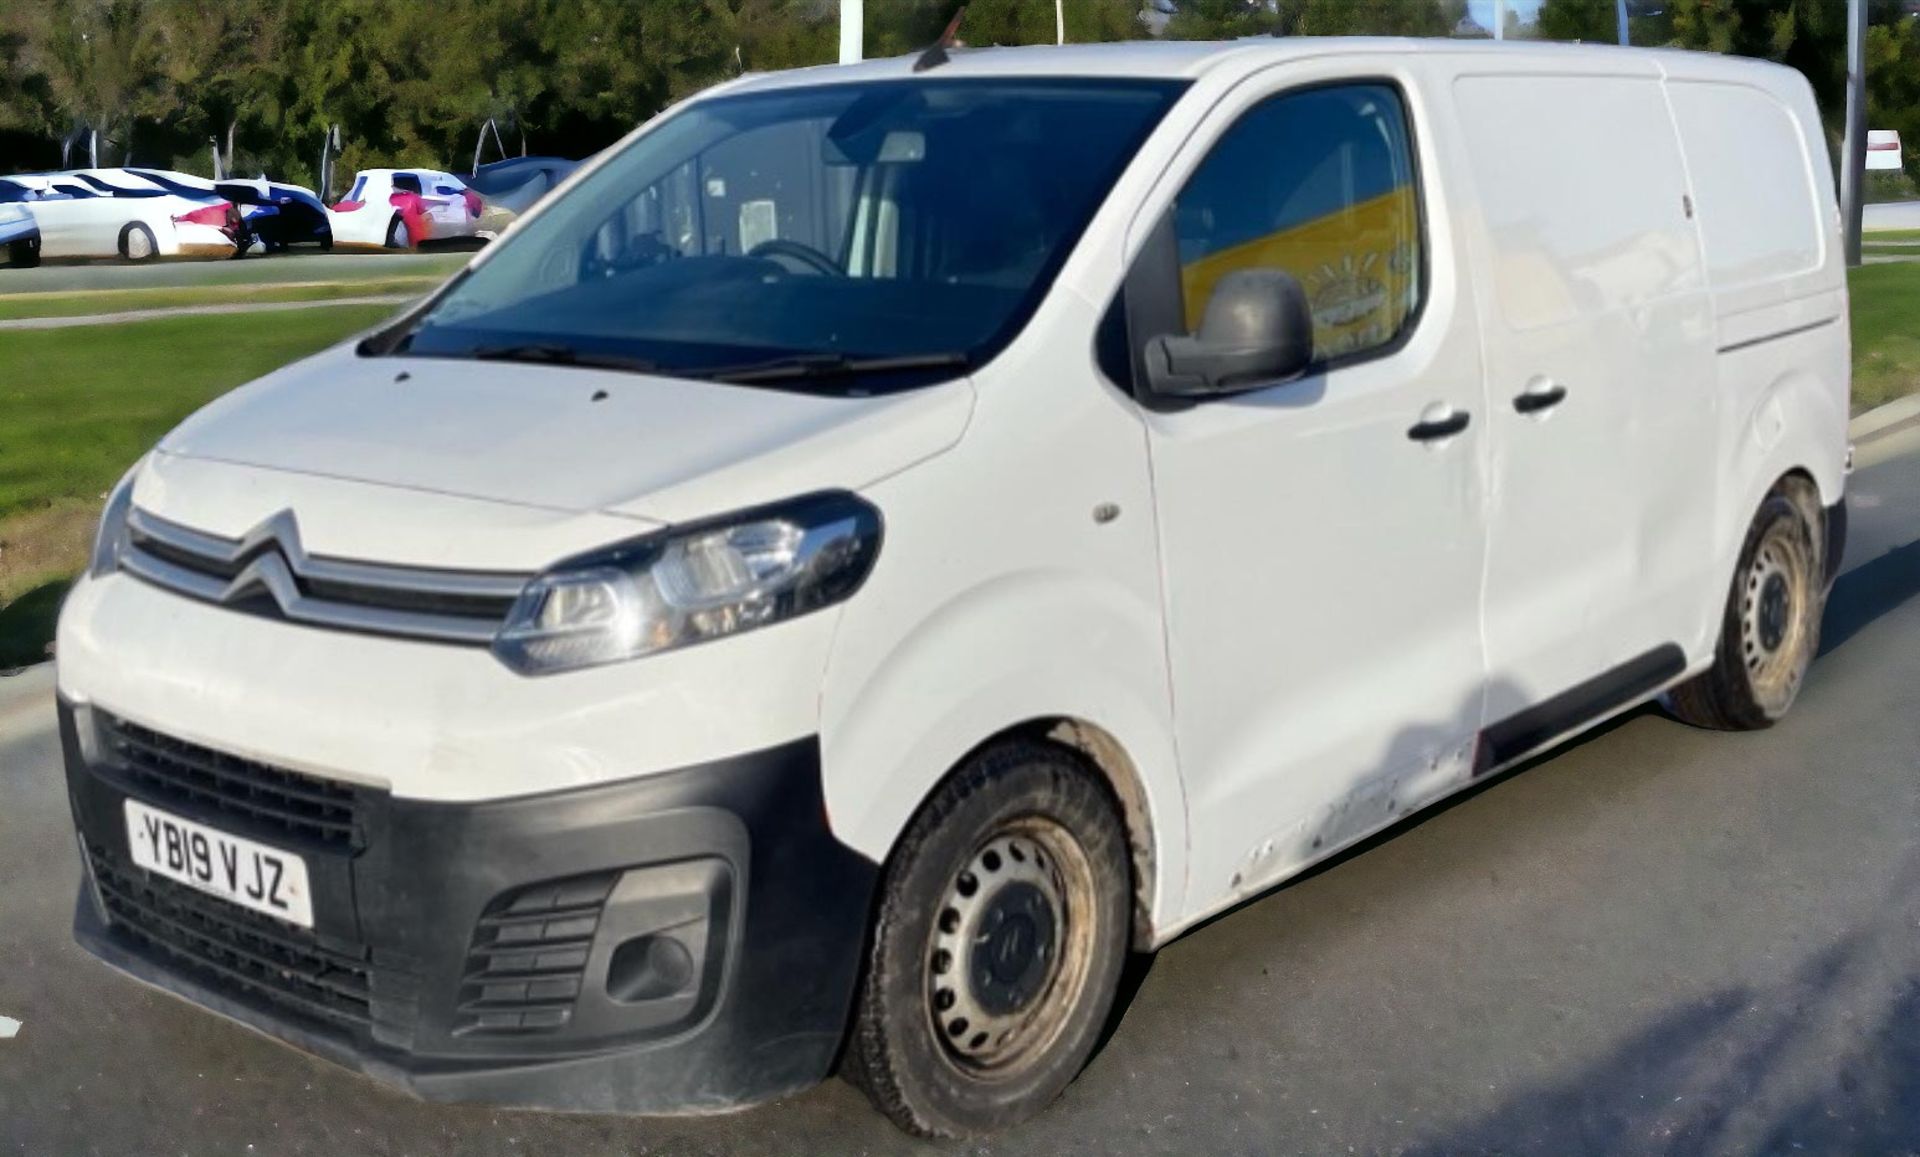 2019-19 REG CITROEN DISPATCH XS 1000 L1H1 - HPI CLEAR - READY TO GO! - Image 2 of 12